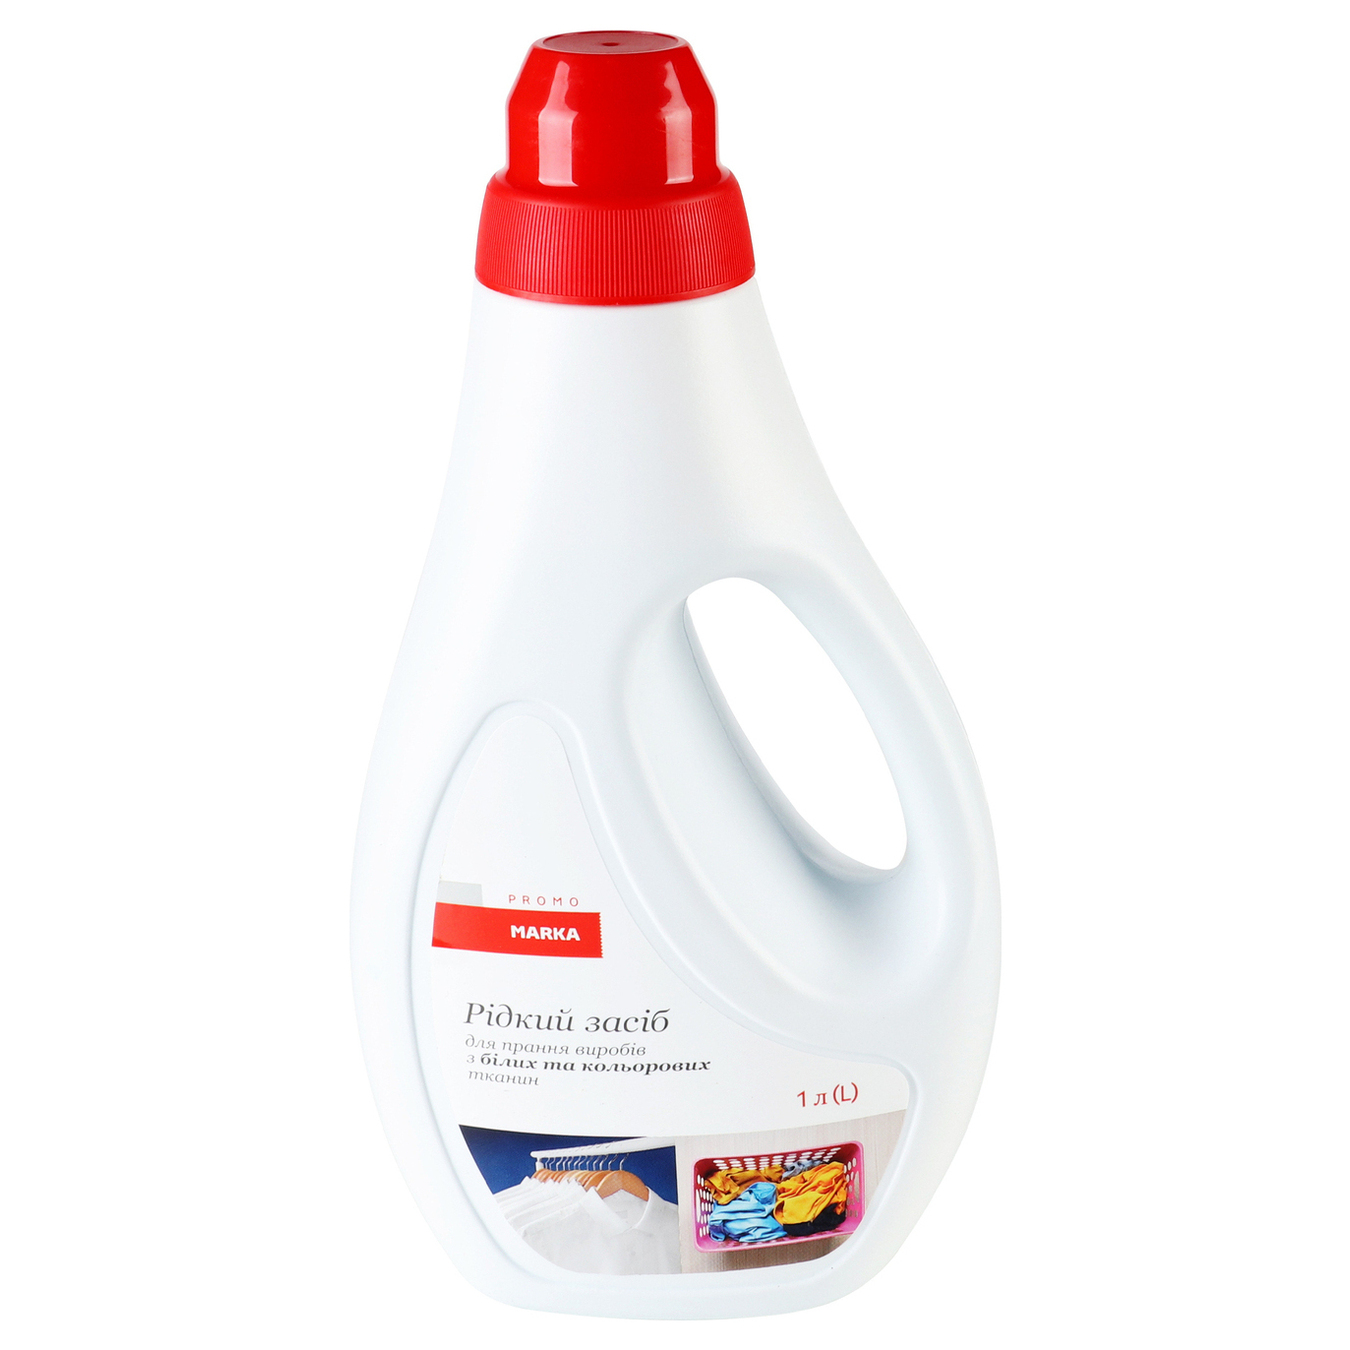 Marka Promo liquid detergent for white and colored fabrics 1 liter 2